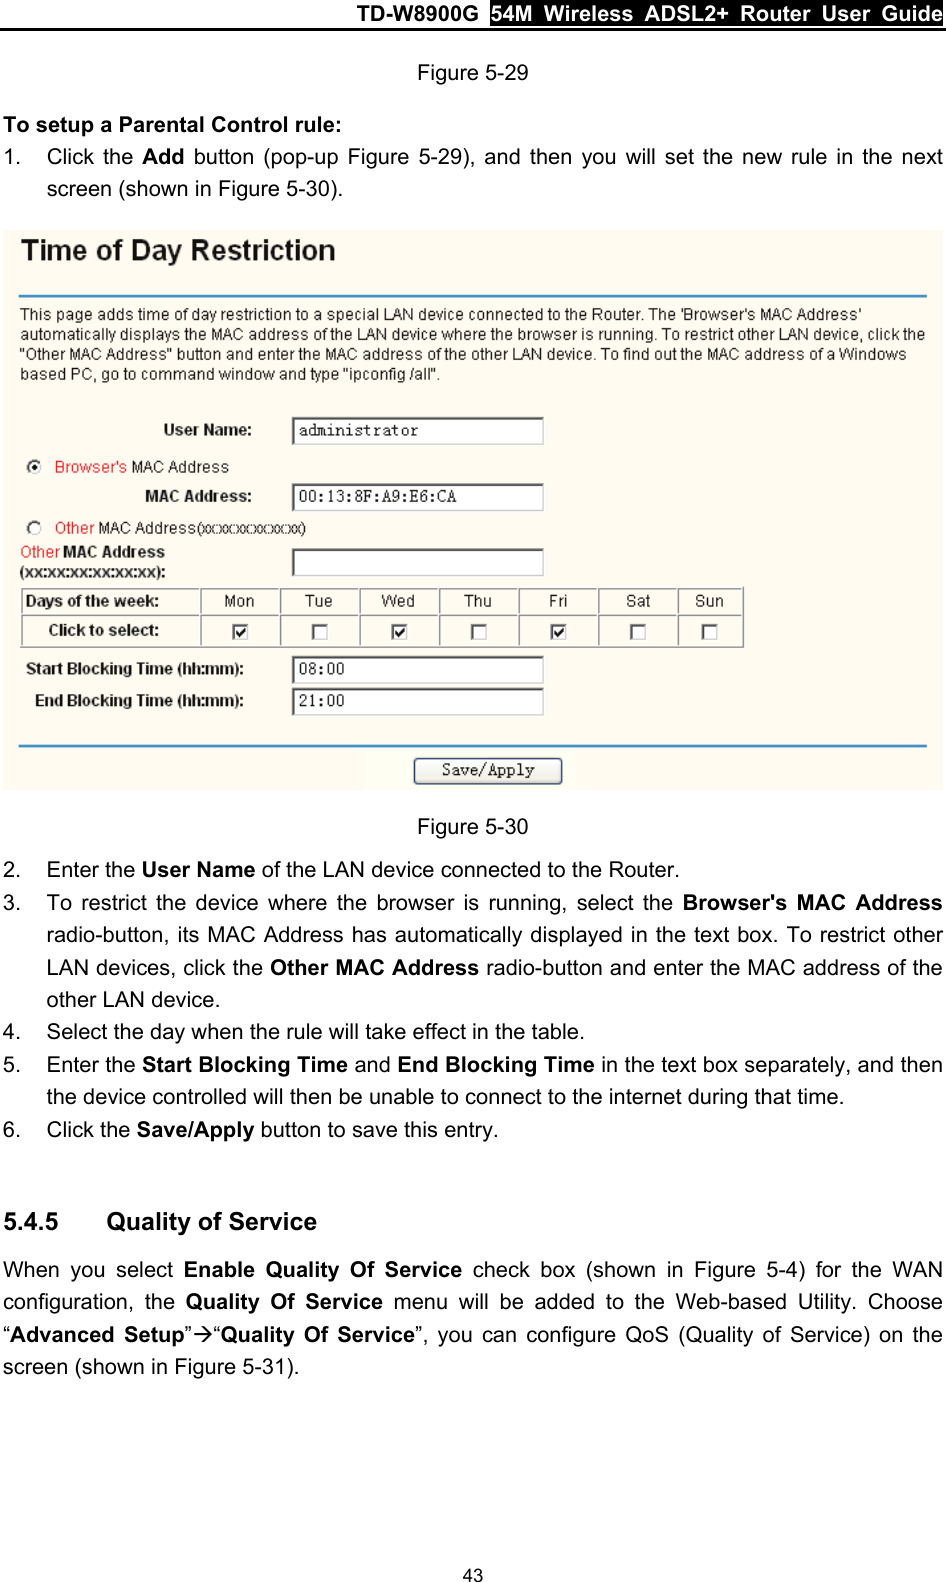 TD-W8900G  54M Wireless ADSL2+ Router User Guide 43 Figure 5-29 To setup a Parental Control rule: 1. Click the Add button (pop-up Figure 5-29), and then you will set the new rule in the next screen (shown in Figure 5-30).  Figure 5-30 2. Enter the User Name of the LAN device connected to the Router. 3.  To restrict the device where the browser is running, select the Browser&apos;s MAC Address radio-button, its MAC Address has automatically displayed in the text box. To restrict other LAN devices, click the Other MAC Address radio-button and enter the MAC address of the other LAN device. 4.  Select the day when the rule will take effect in the table. 5. Enter the Start Blocking Time and End Blocking Time in the text box separately, and then the device controlled will then be unable to connect to the internet during that time. 6. Click the Save/Apply button to save this entry.  5.4.5  Quality of Service When you select Enable Quality Of Service check box (shown in Figure 5-4) for the WAN configuration, the Quality Of Service menu will be added to the Web-based Utility. Choose “Advanced Setup”Æ“Quality Of Service”, you can configure QoS (Quality of Service) on the screen (shown in Figure 5-31). 